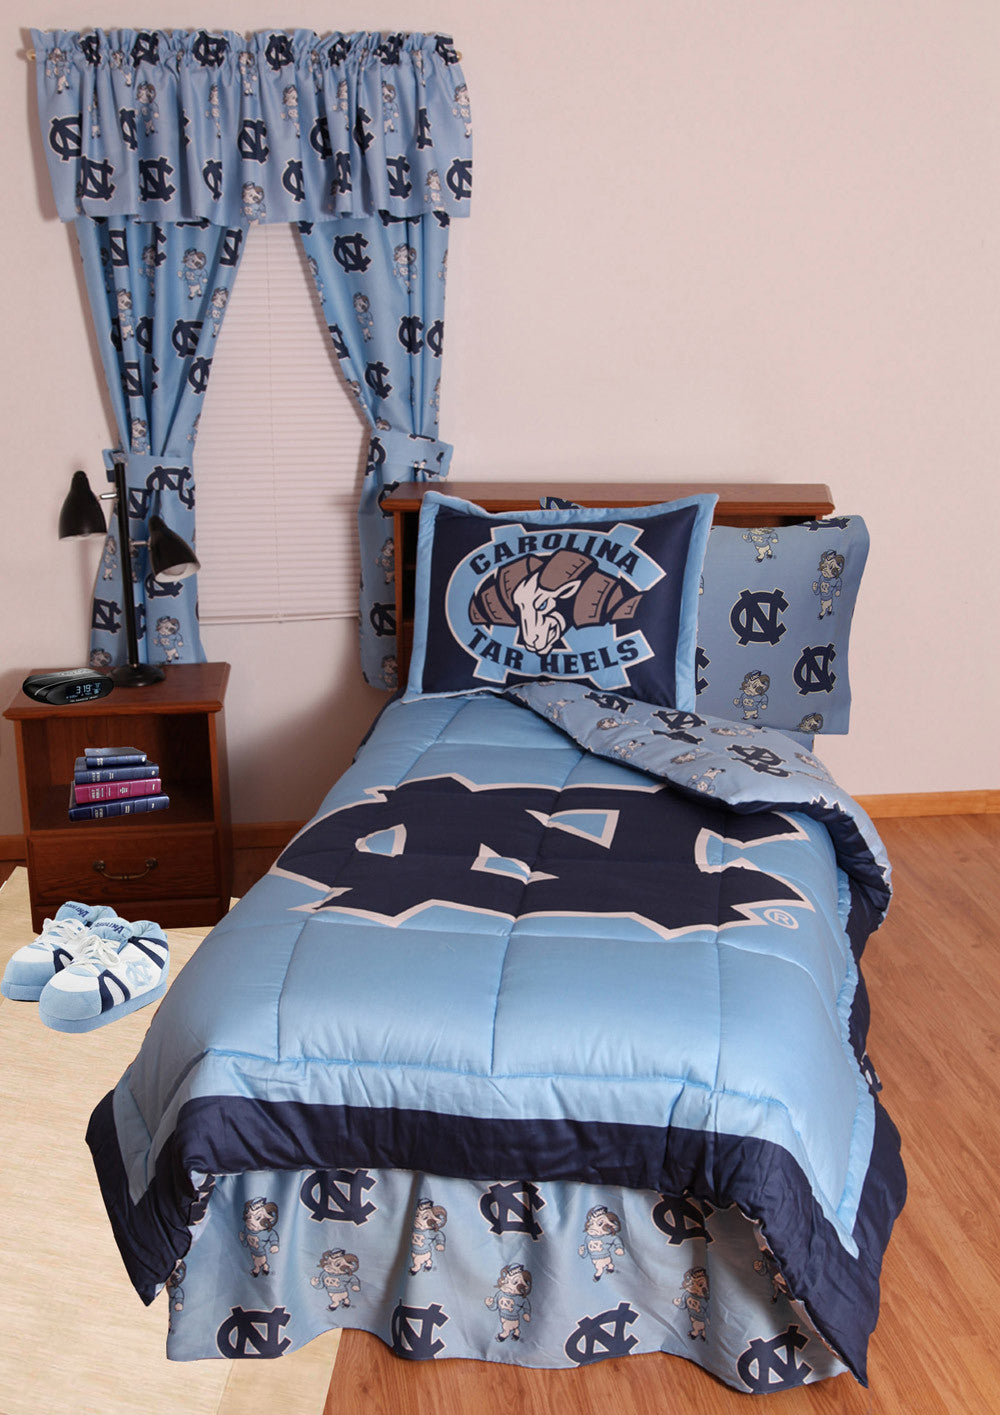 Unc Bed In A Bag King - With Team Colored Sheets - Ncubbkg By College Covers